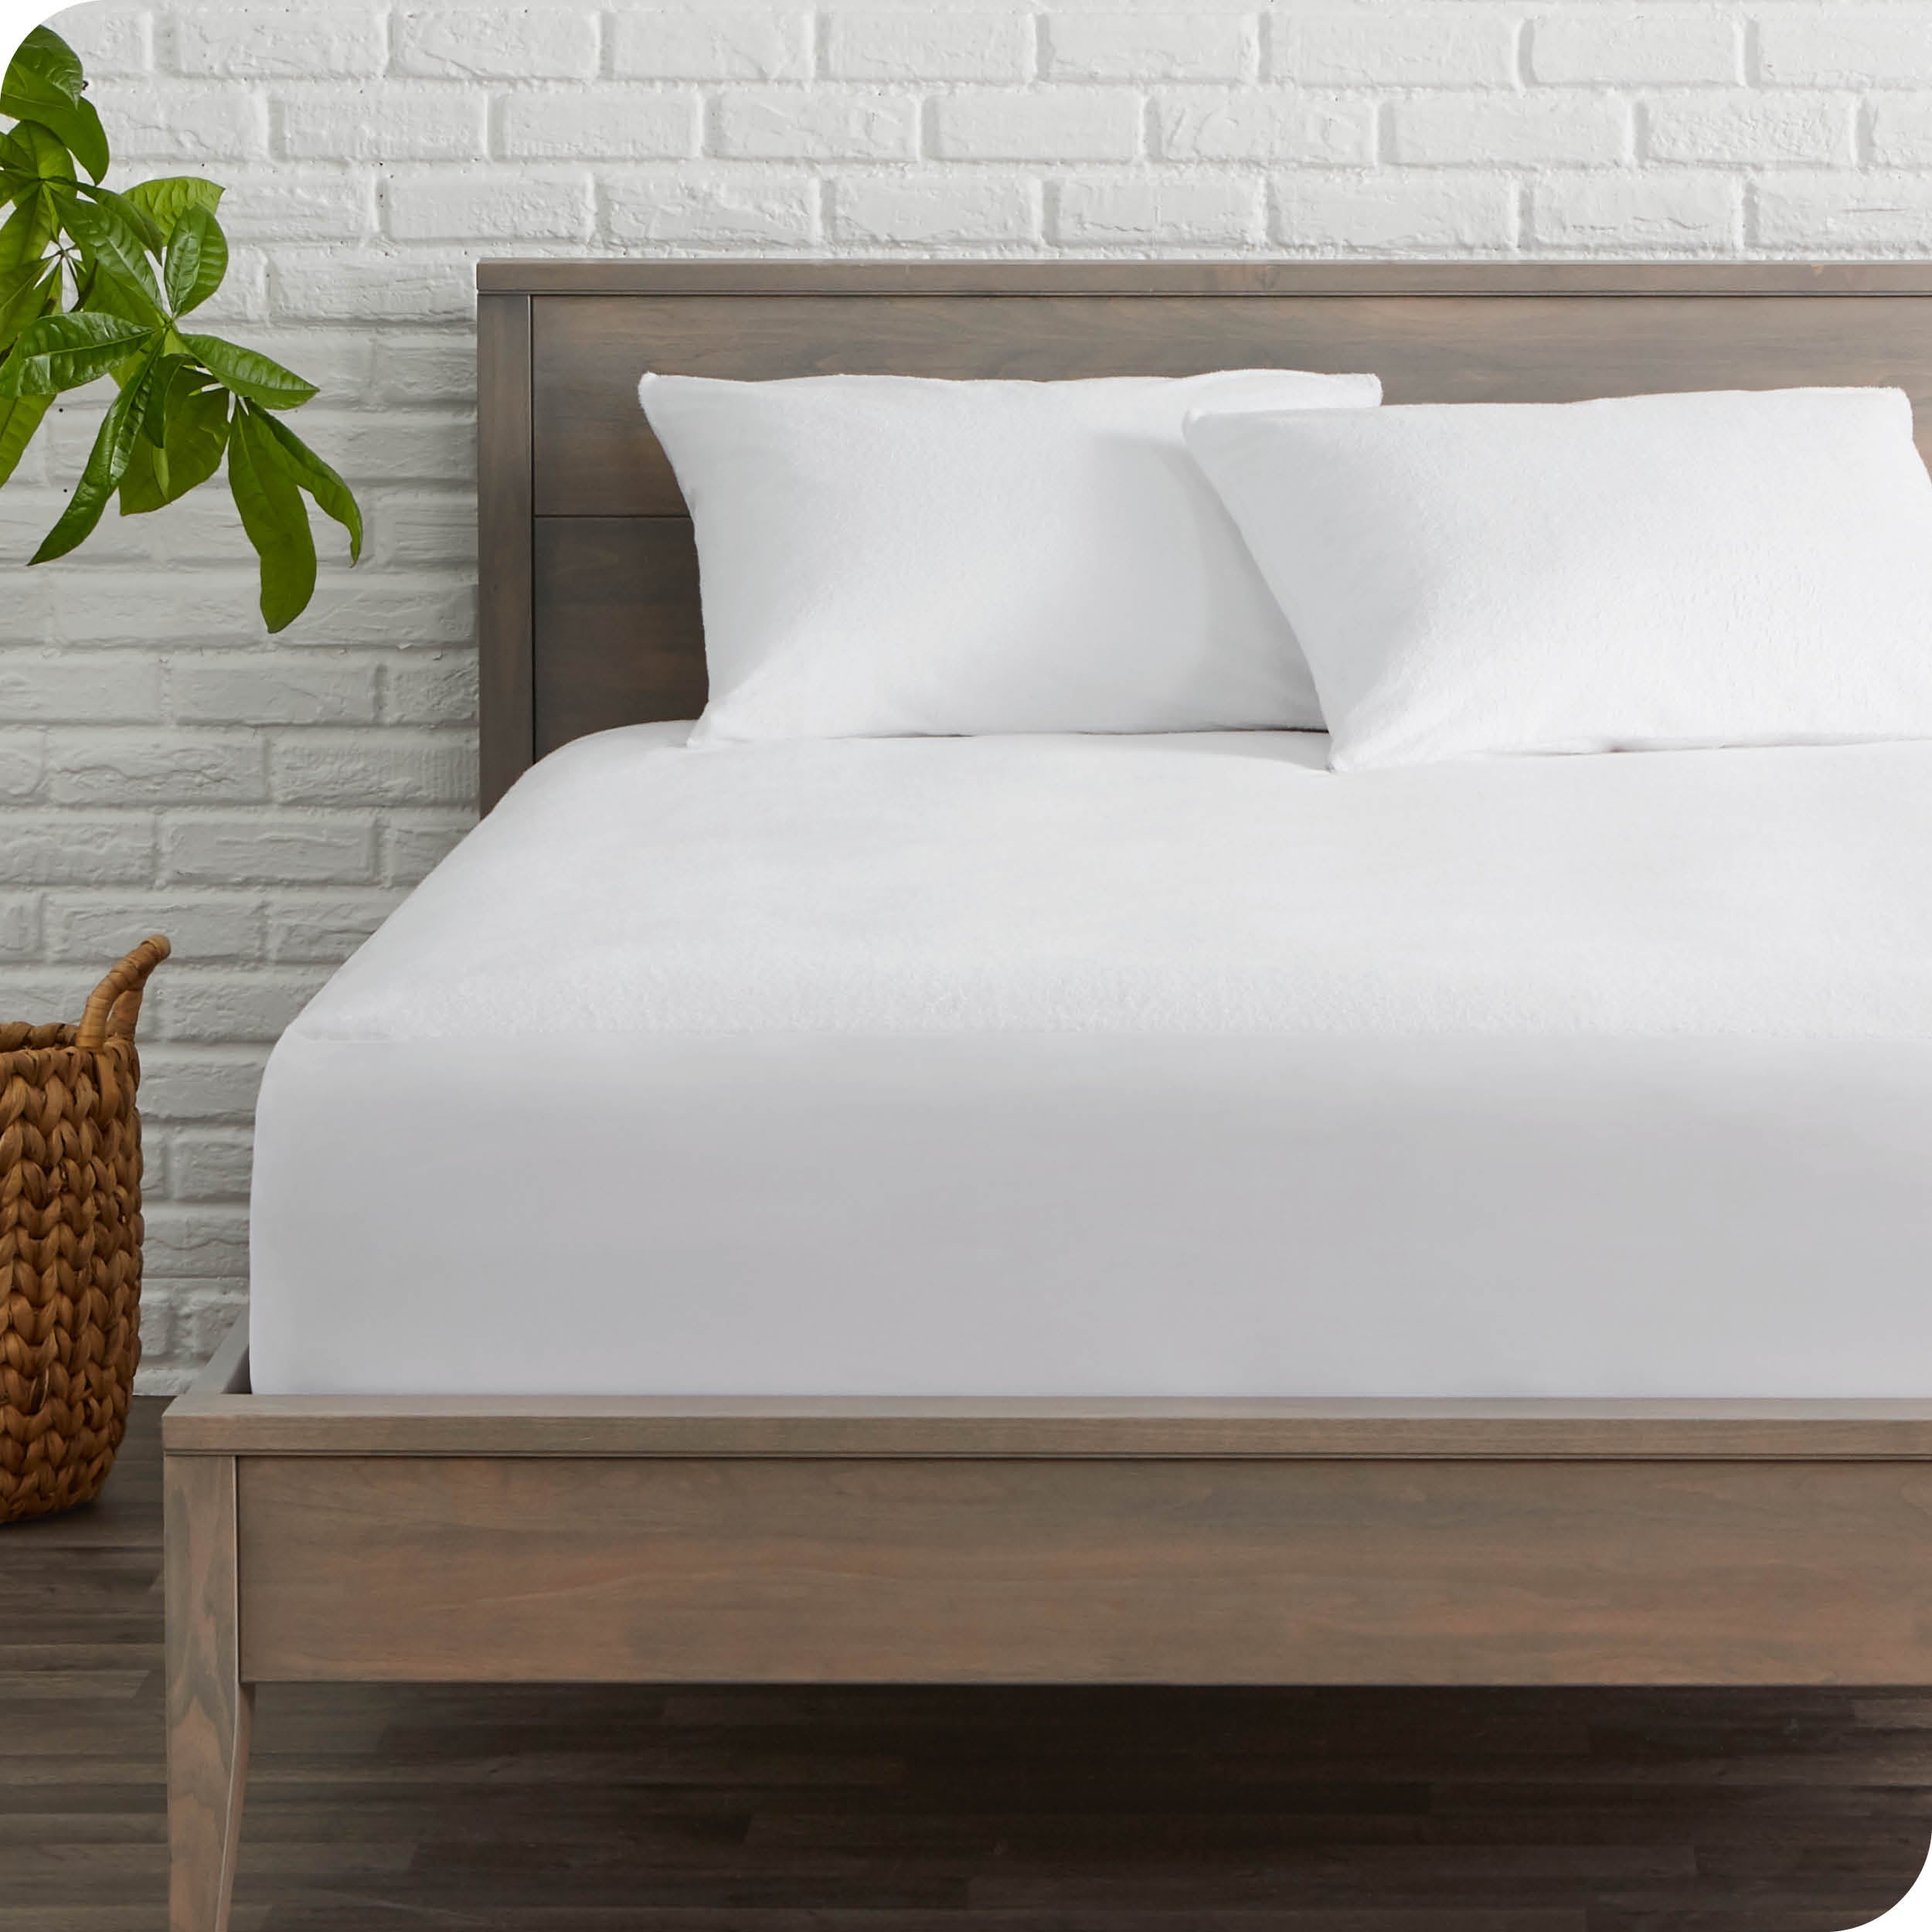 Pillow protectors covering pillows on a bed with a mattress protector